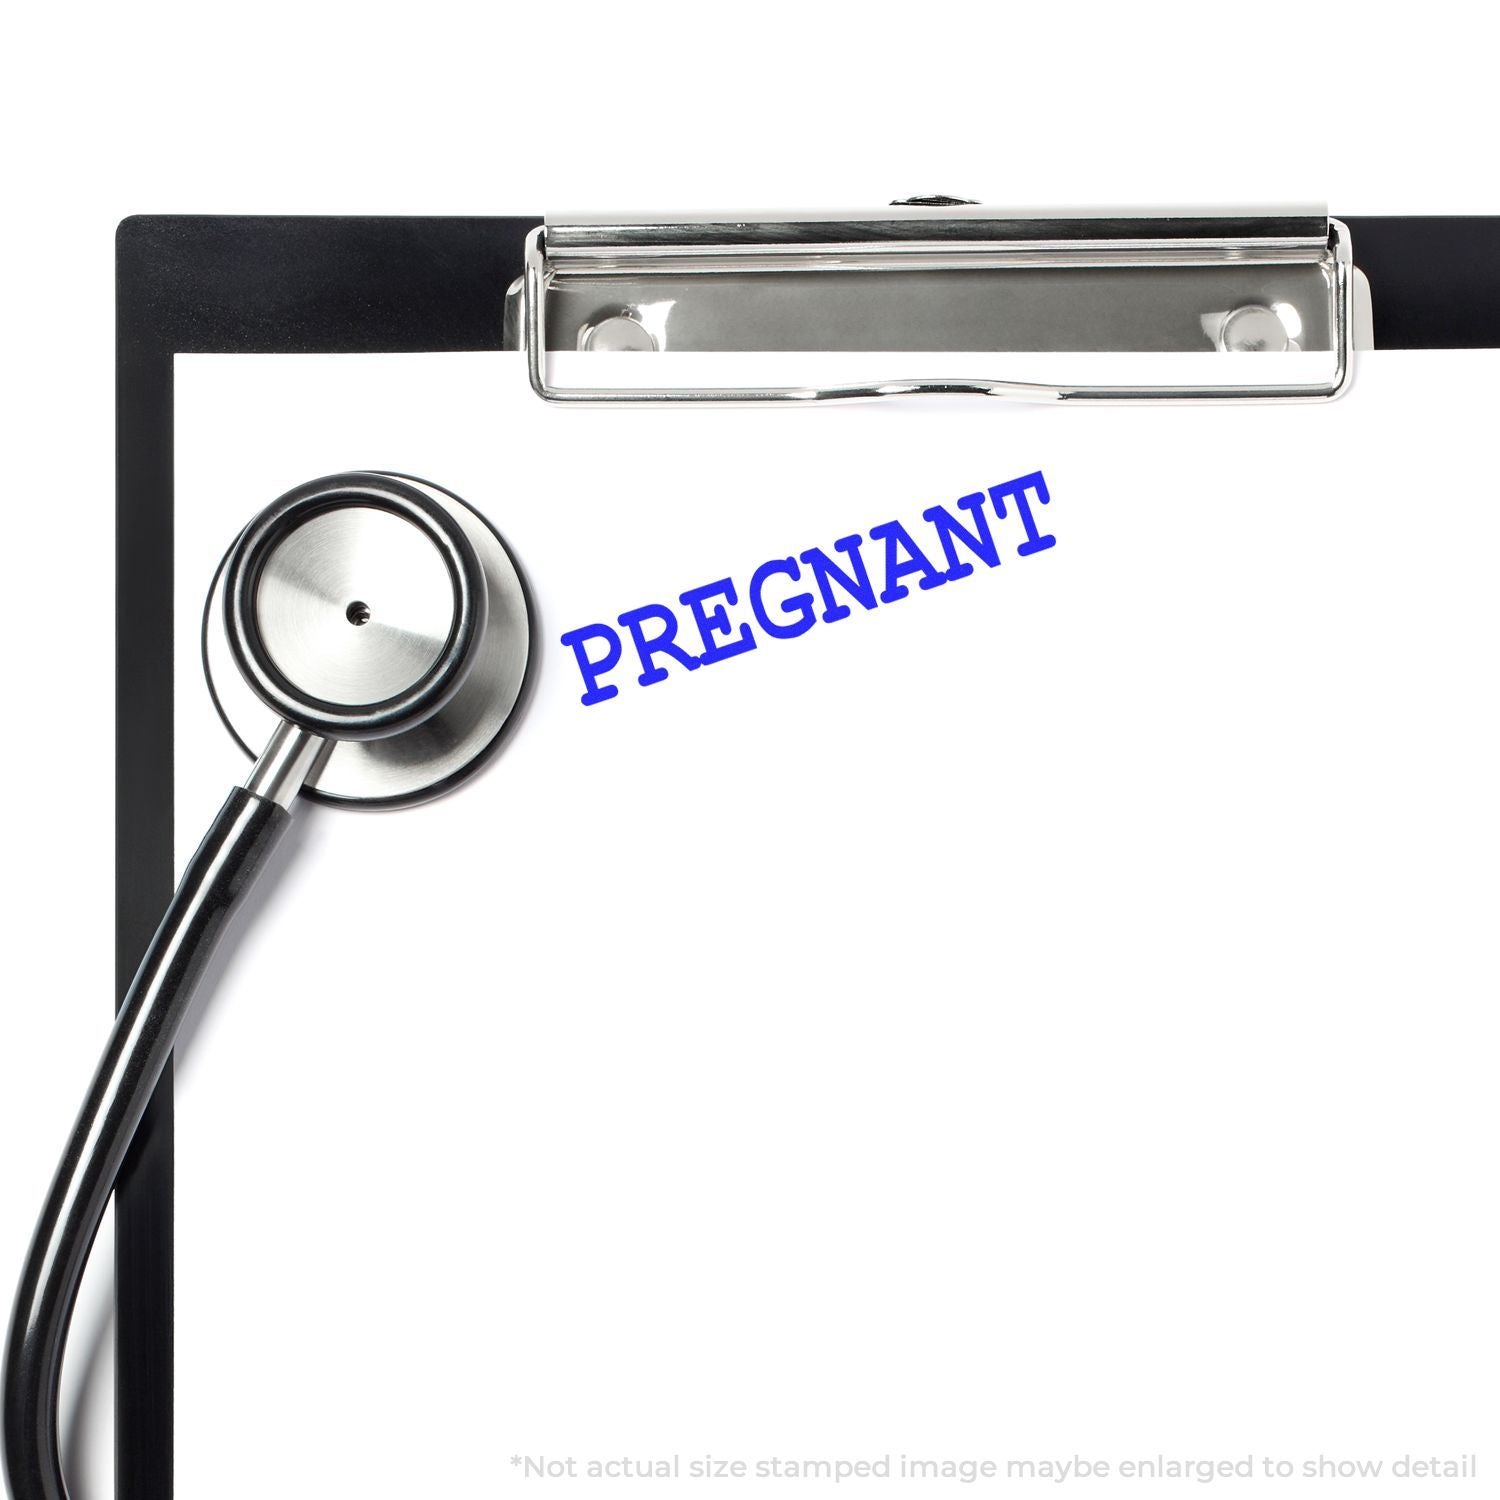 A self-inking stamp with a stamped image showing how the text "PREGNANT" is displayed after stamping.